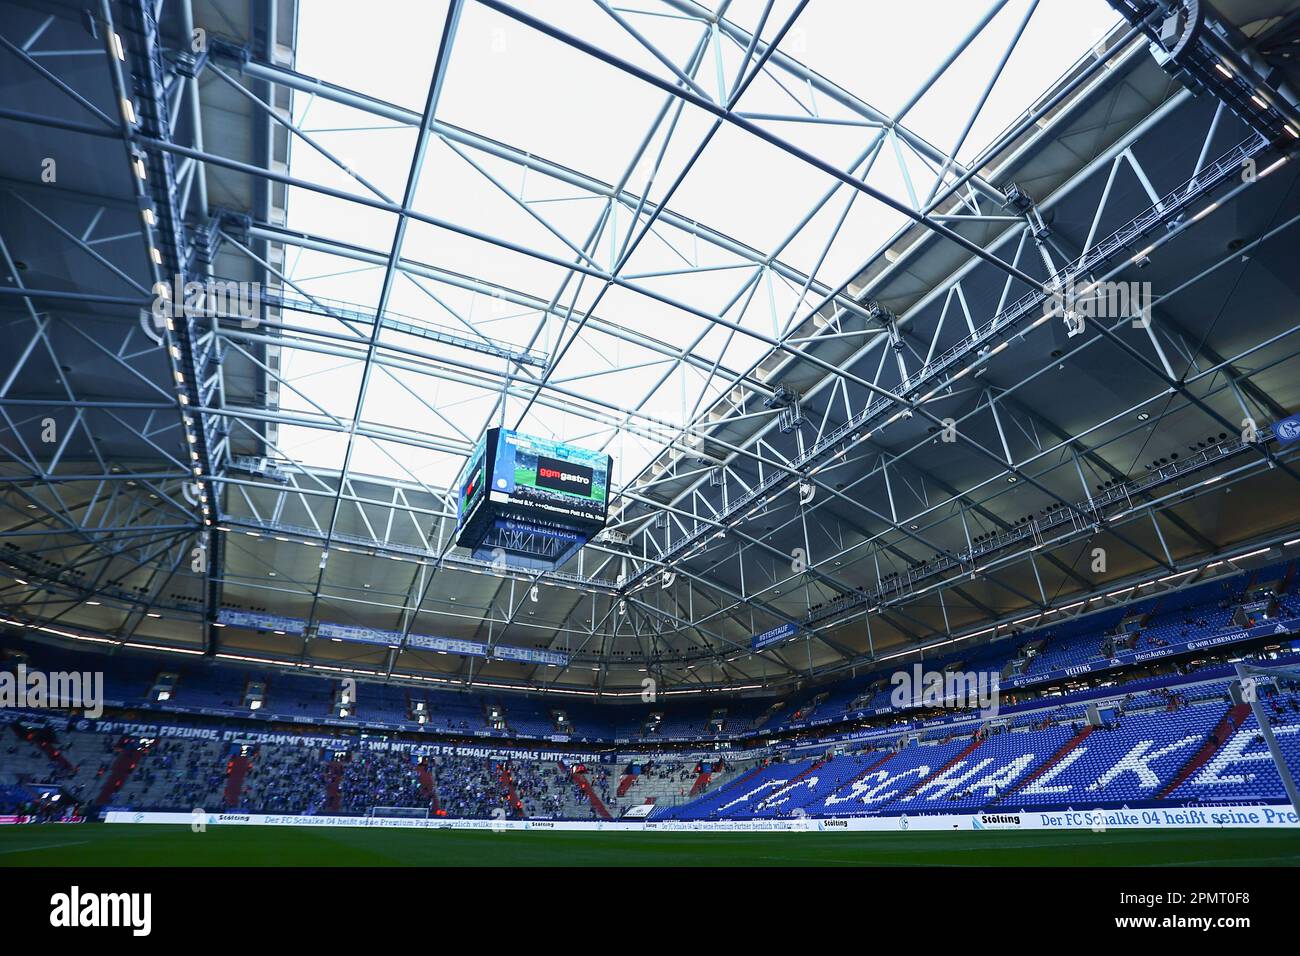 Veltins Arena, Gelsenkirchen, GER, FC Schalke 04 vs. Hertha BSC, Fussball, 1. Bundesliga, 28. Spieltag, Spielzeit 2022/2023, 14.04.2023  DFL REGULATIONS PROHIBIT ANY USE OF PHOTOGRAPHS AS IMAGE SEQUENCES AND/OR QUASI-VIDEO.  Credit: Ant Palmer/Alamy Live News Stock Photo